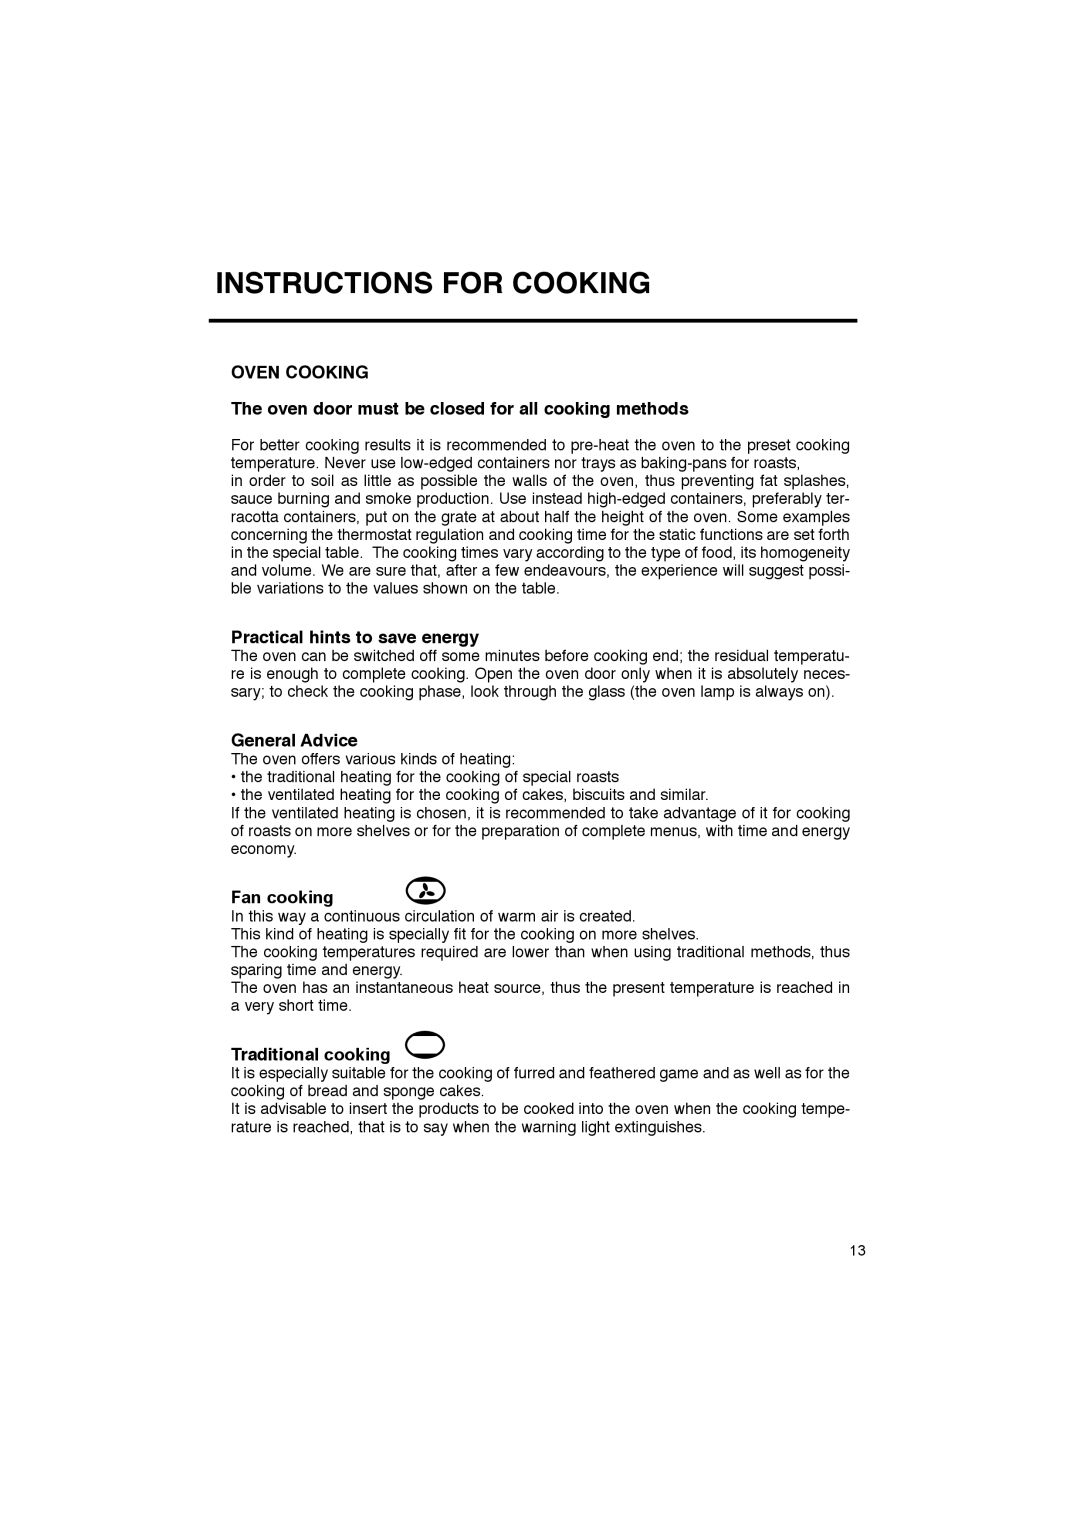 Blanco BOSE45X Instructions For Cooking, OVEN COOKING The oven door must be closed for all cooking methods, General Advice 